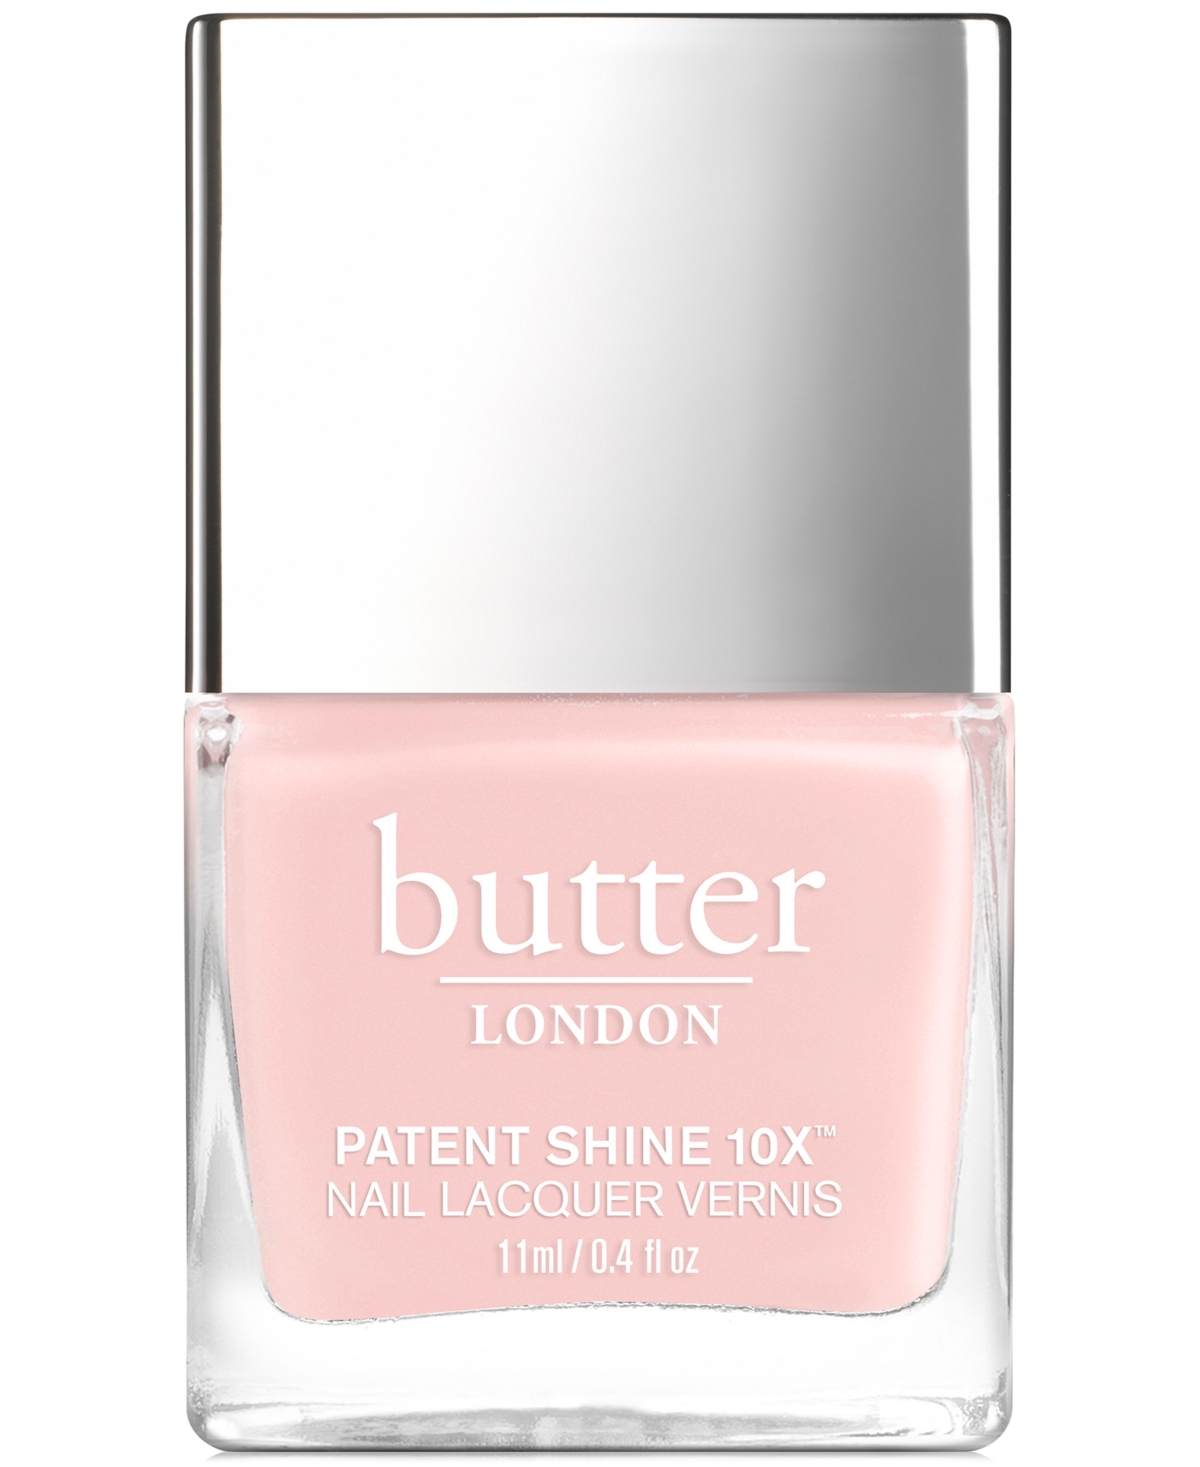 Butter London Patent Shine 10x Nail Lacquer In Piece Of Cake (soft Dusty Pink Crã¨me)